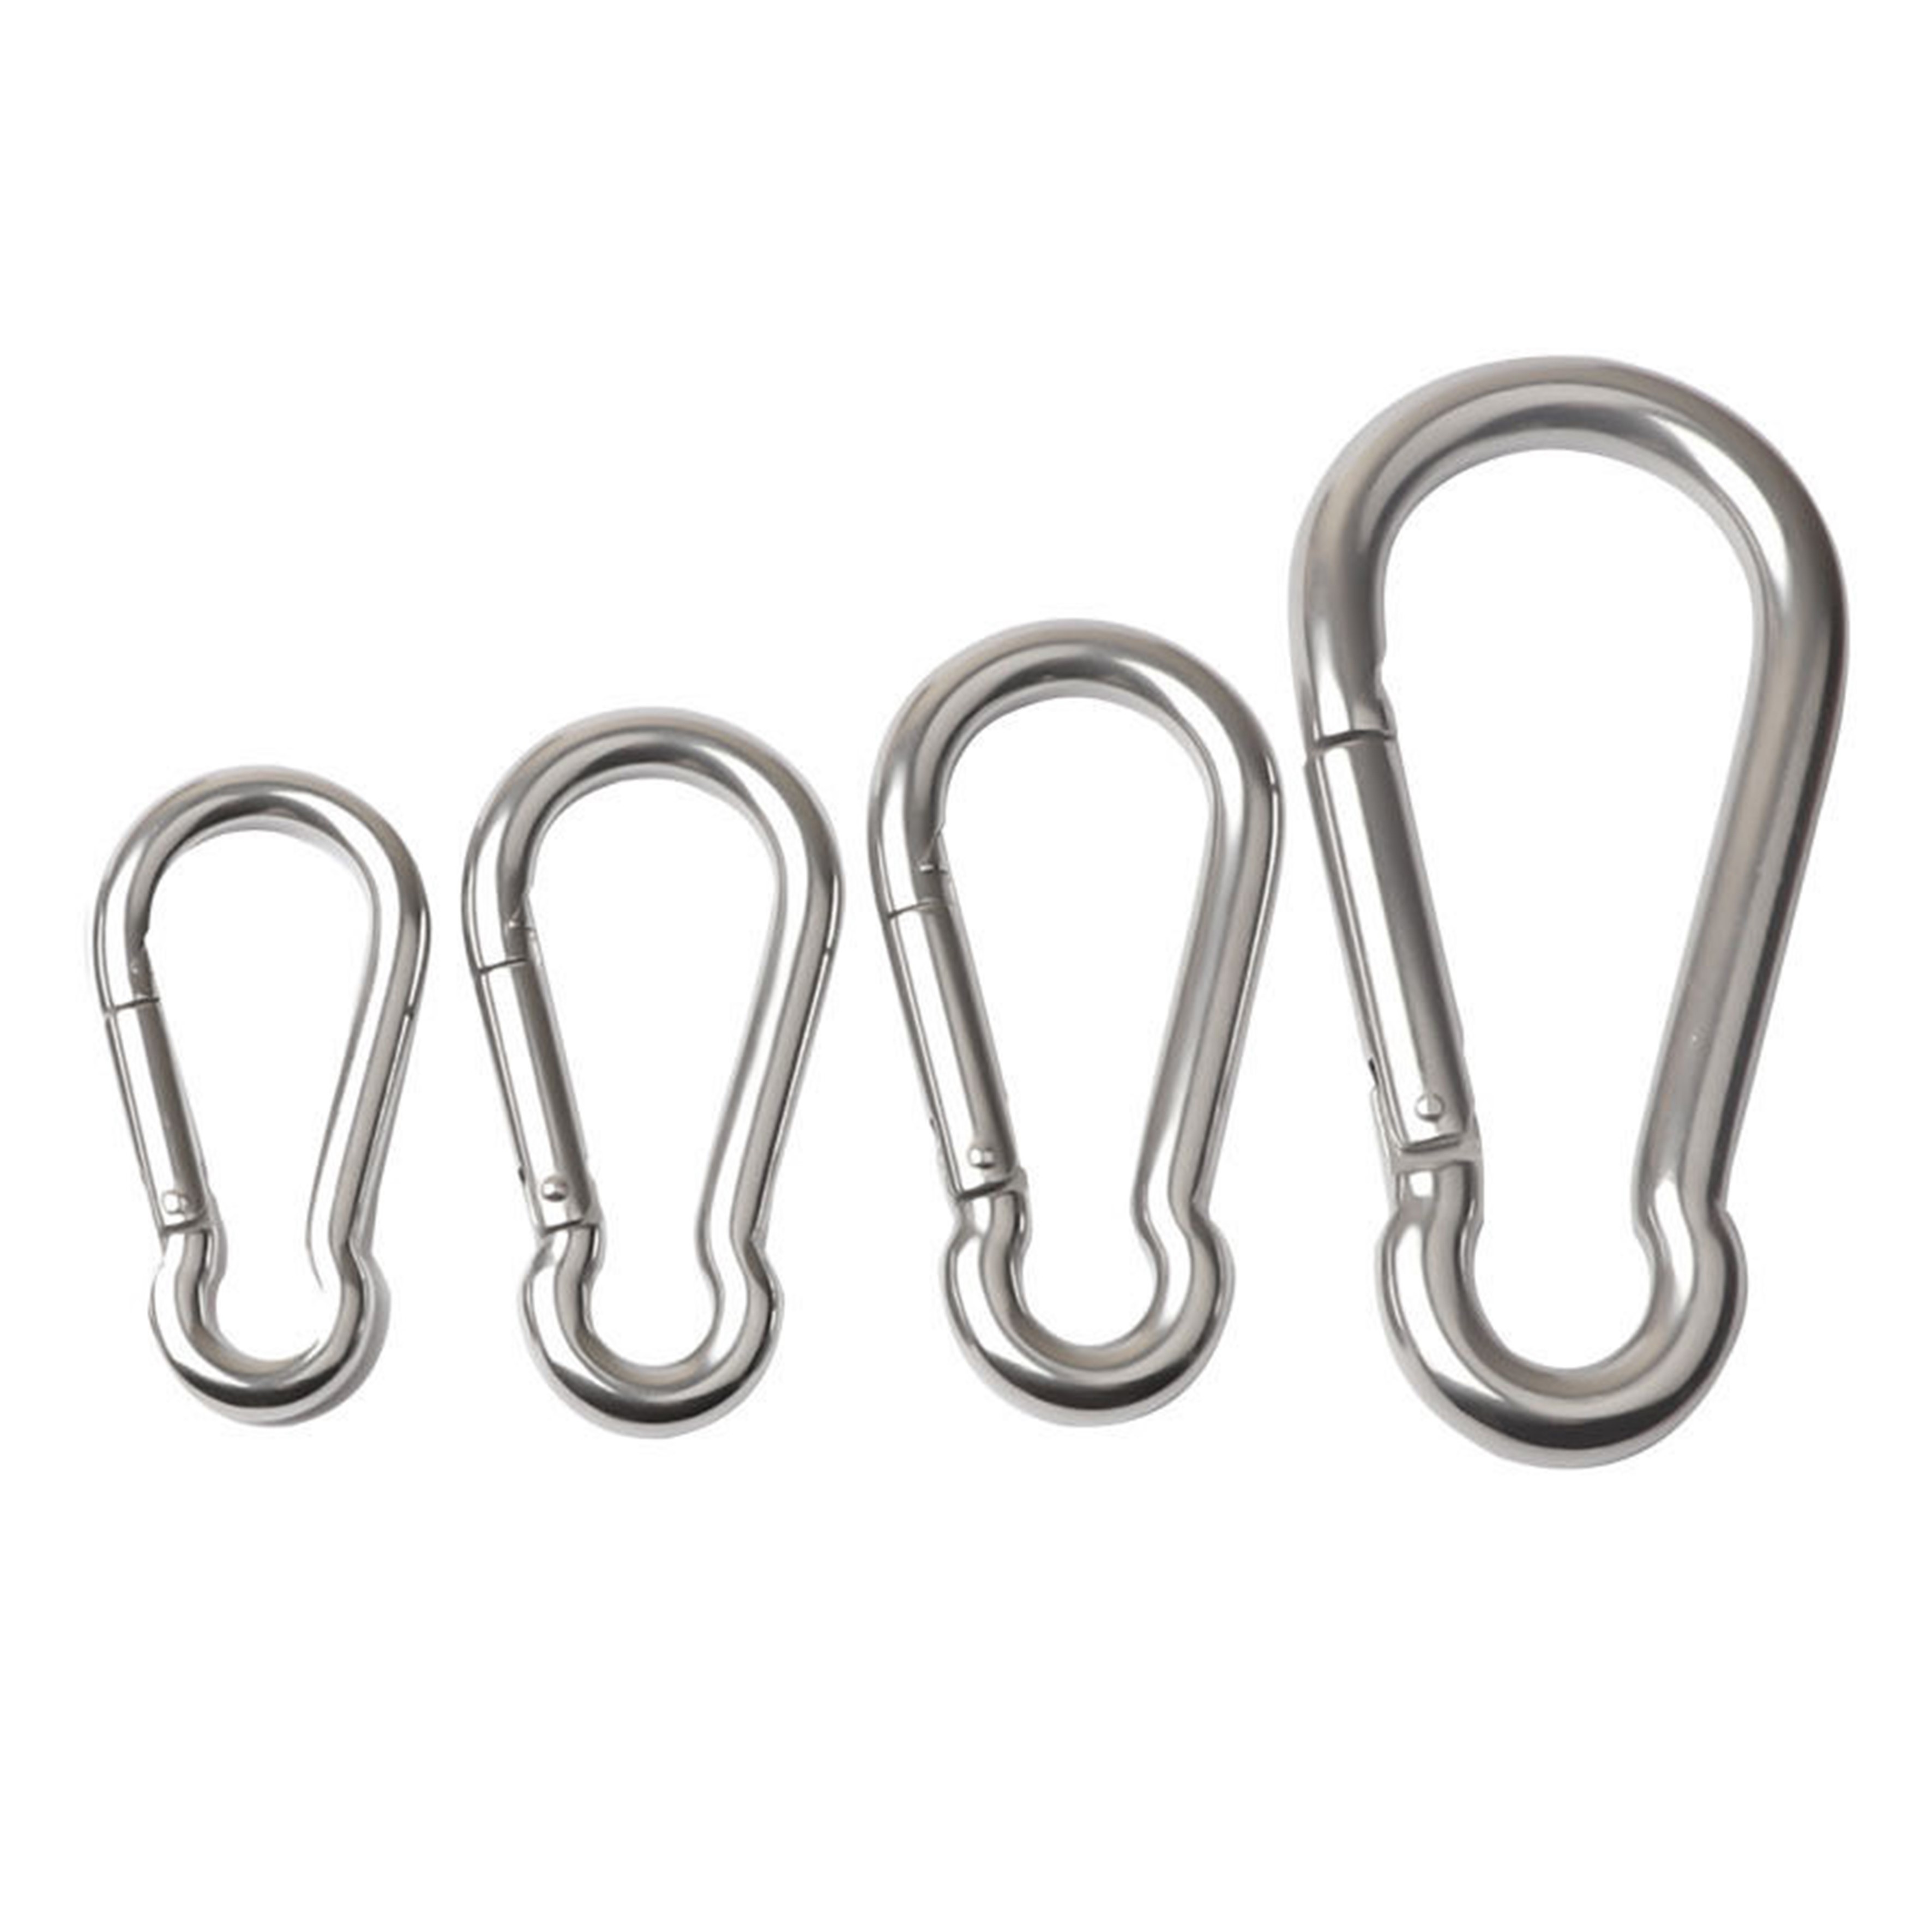 Aluminum Spring Small Carabiner Hook Snap Hook Keychain Set Silver,  50x2.5x4.4mm Ideal For EDC, Survival, Outdoor Camping P230420 From  Mengyang10, $13.84